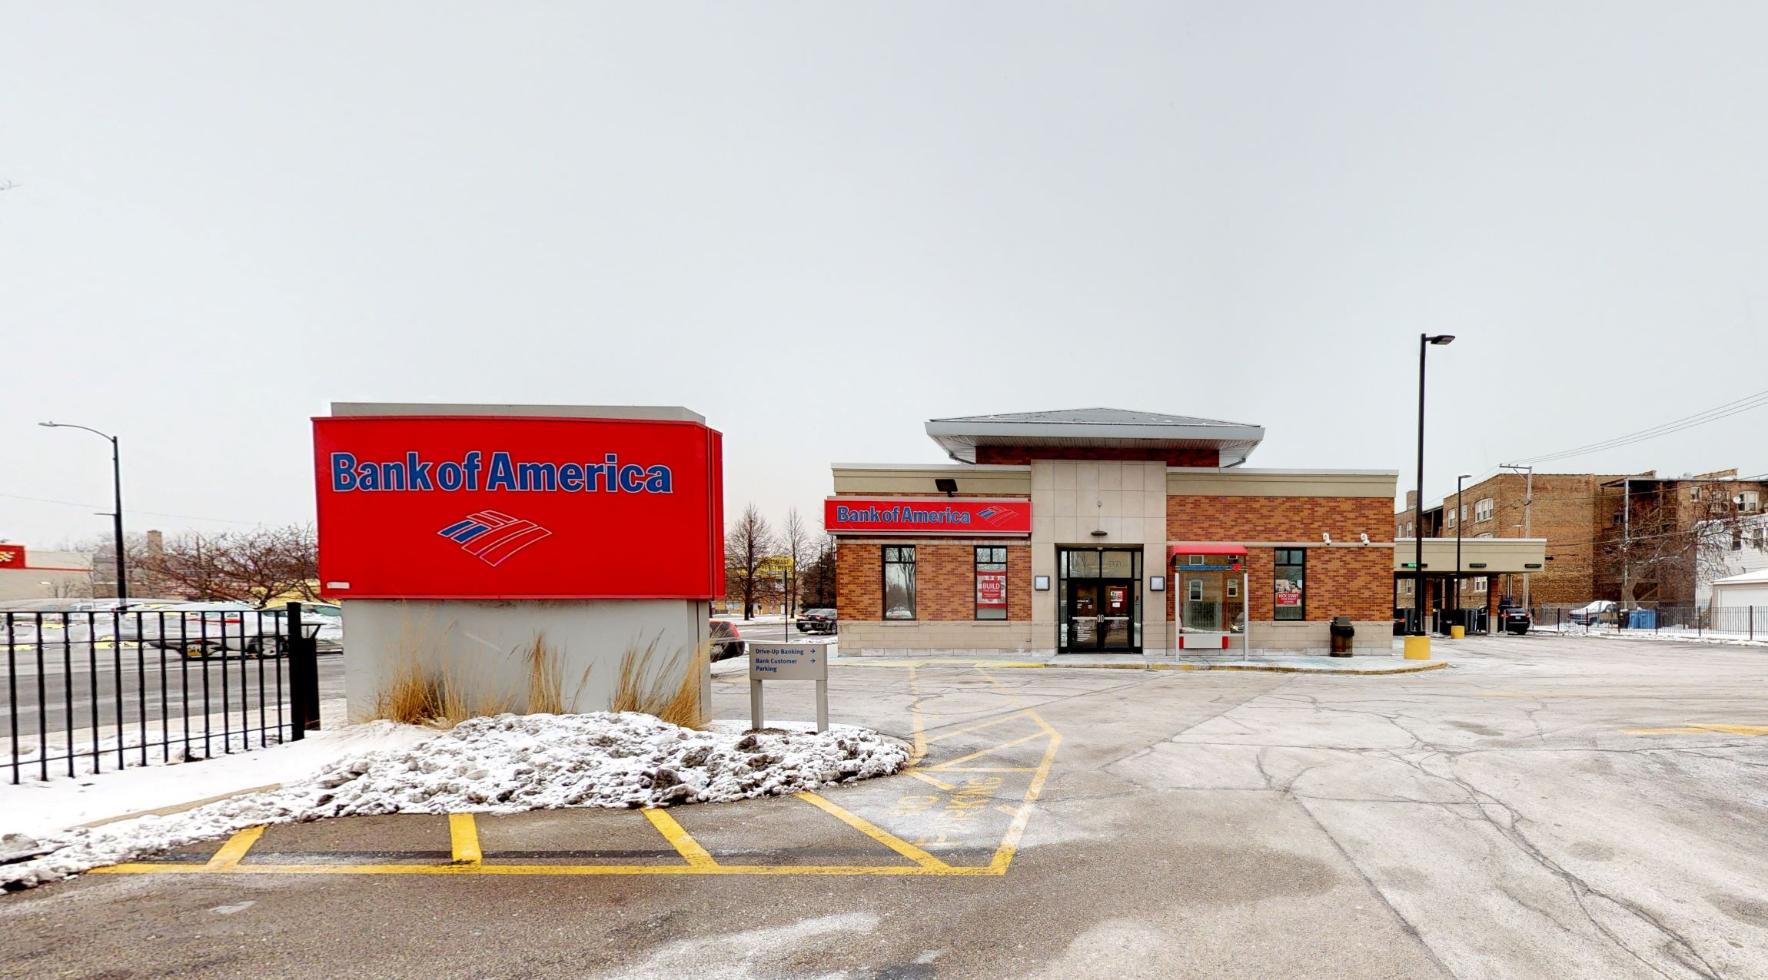 Bank of America financial center with drive-thru ATM | 7131 S Stony Island Ave, Chicago, IL 60649